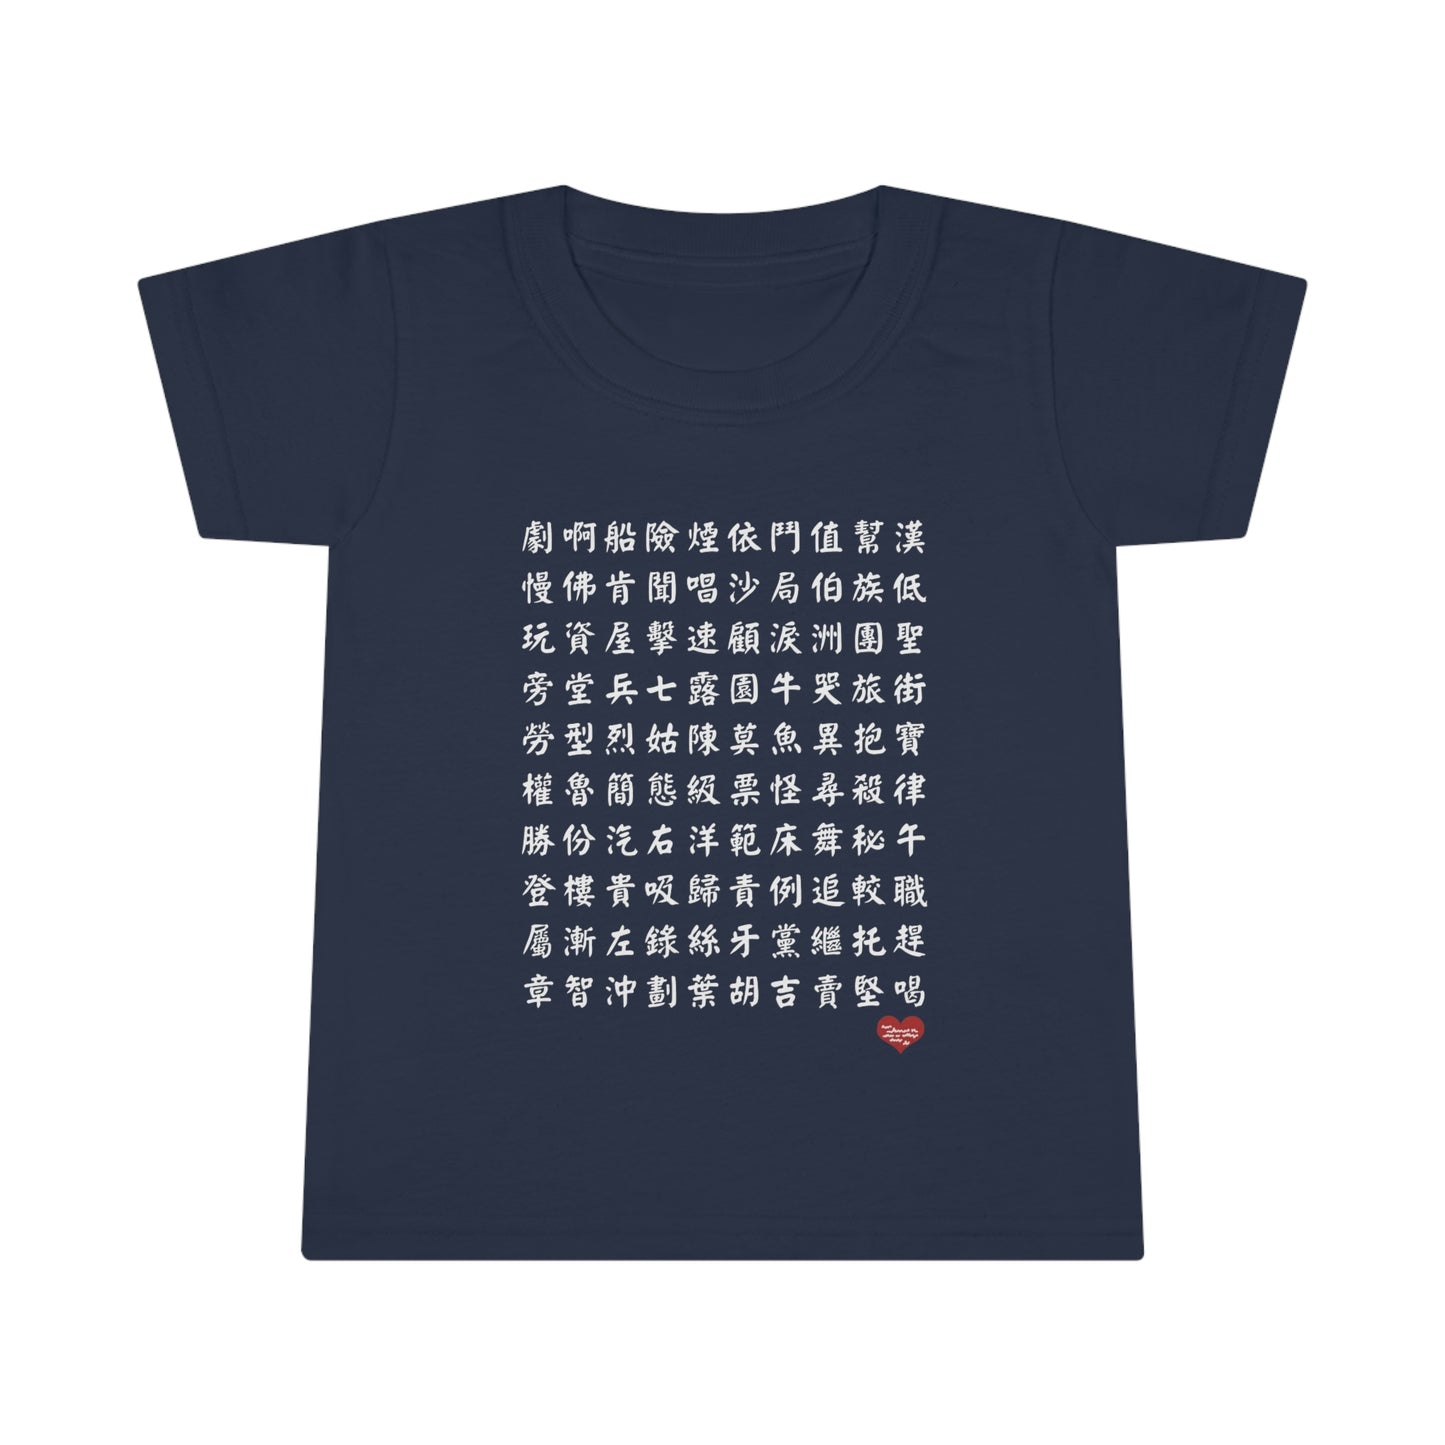 Toddler 1000 Characters Set 8,  1000漢字系列 #8 Color Block T-shirts